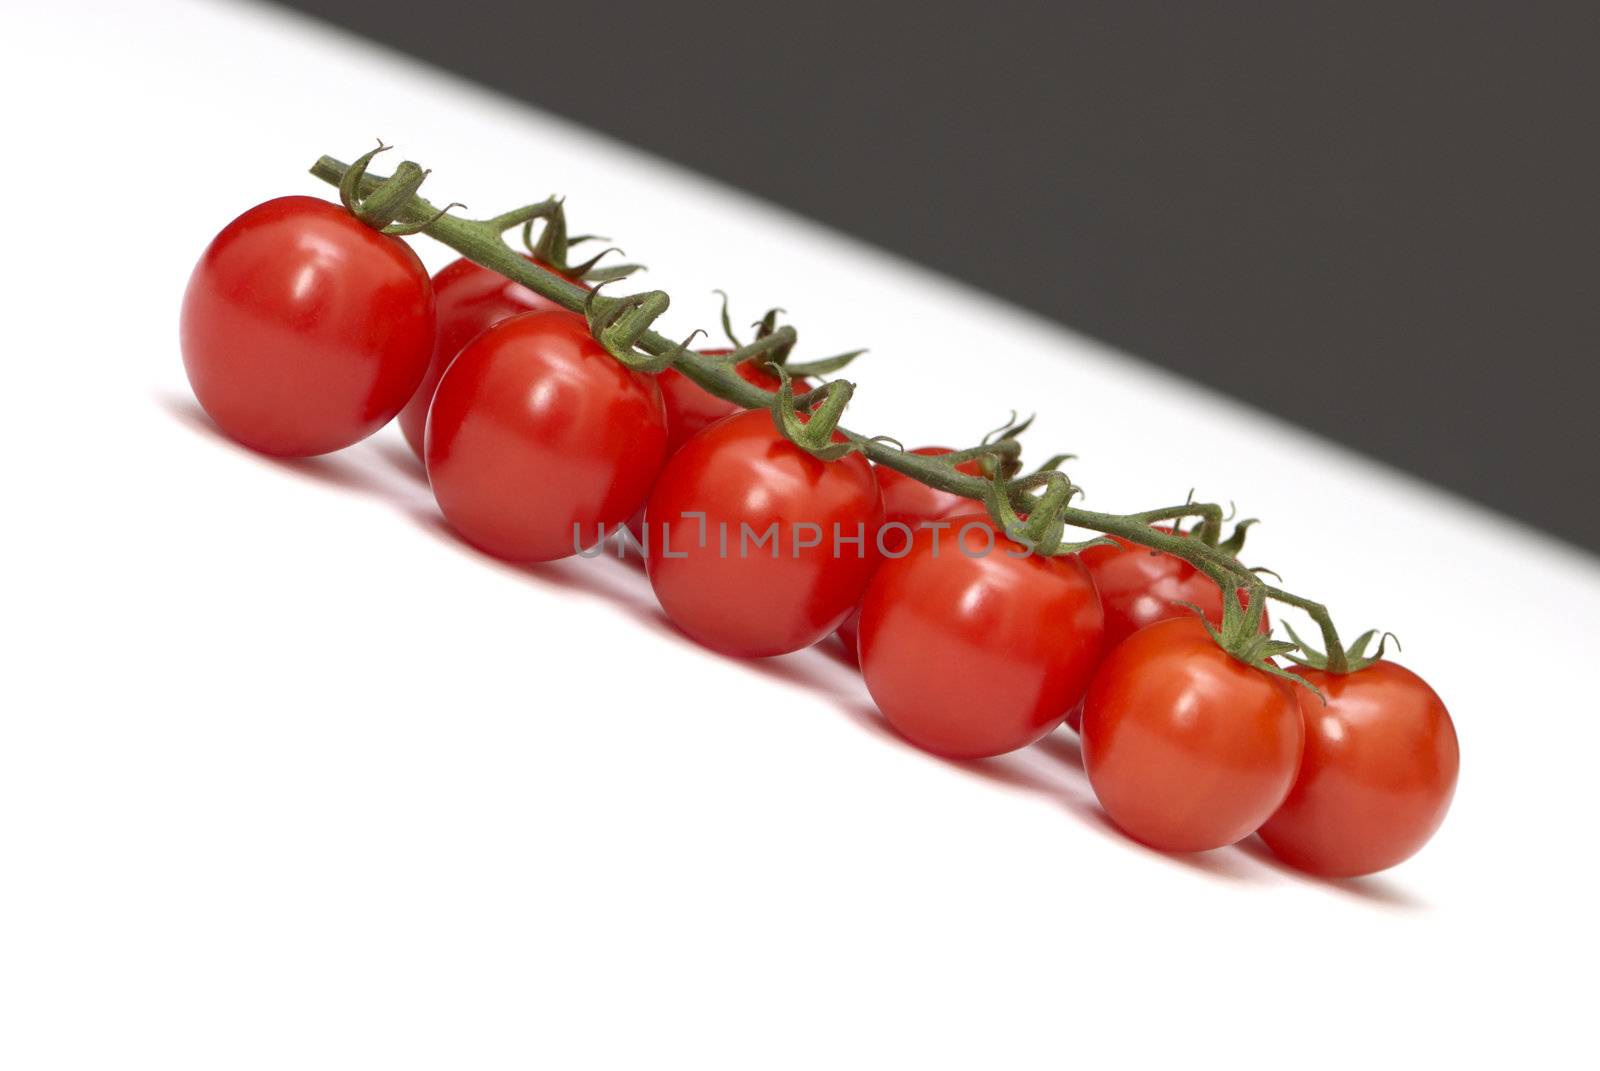 Branch a tomato diagonally on a white and black background